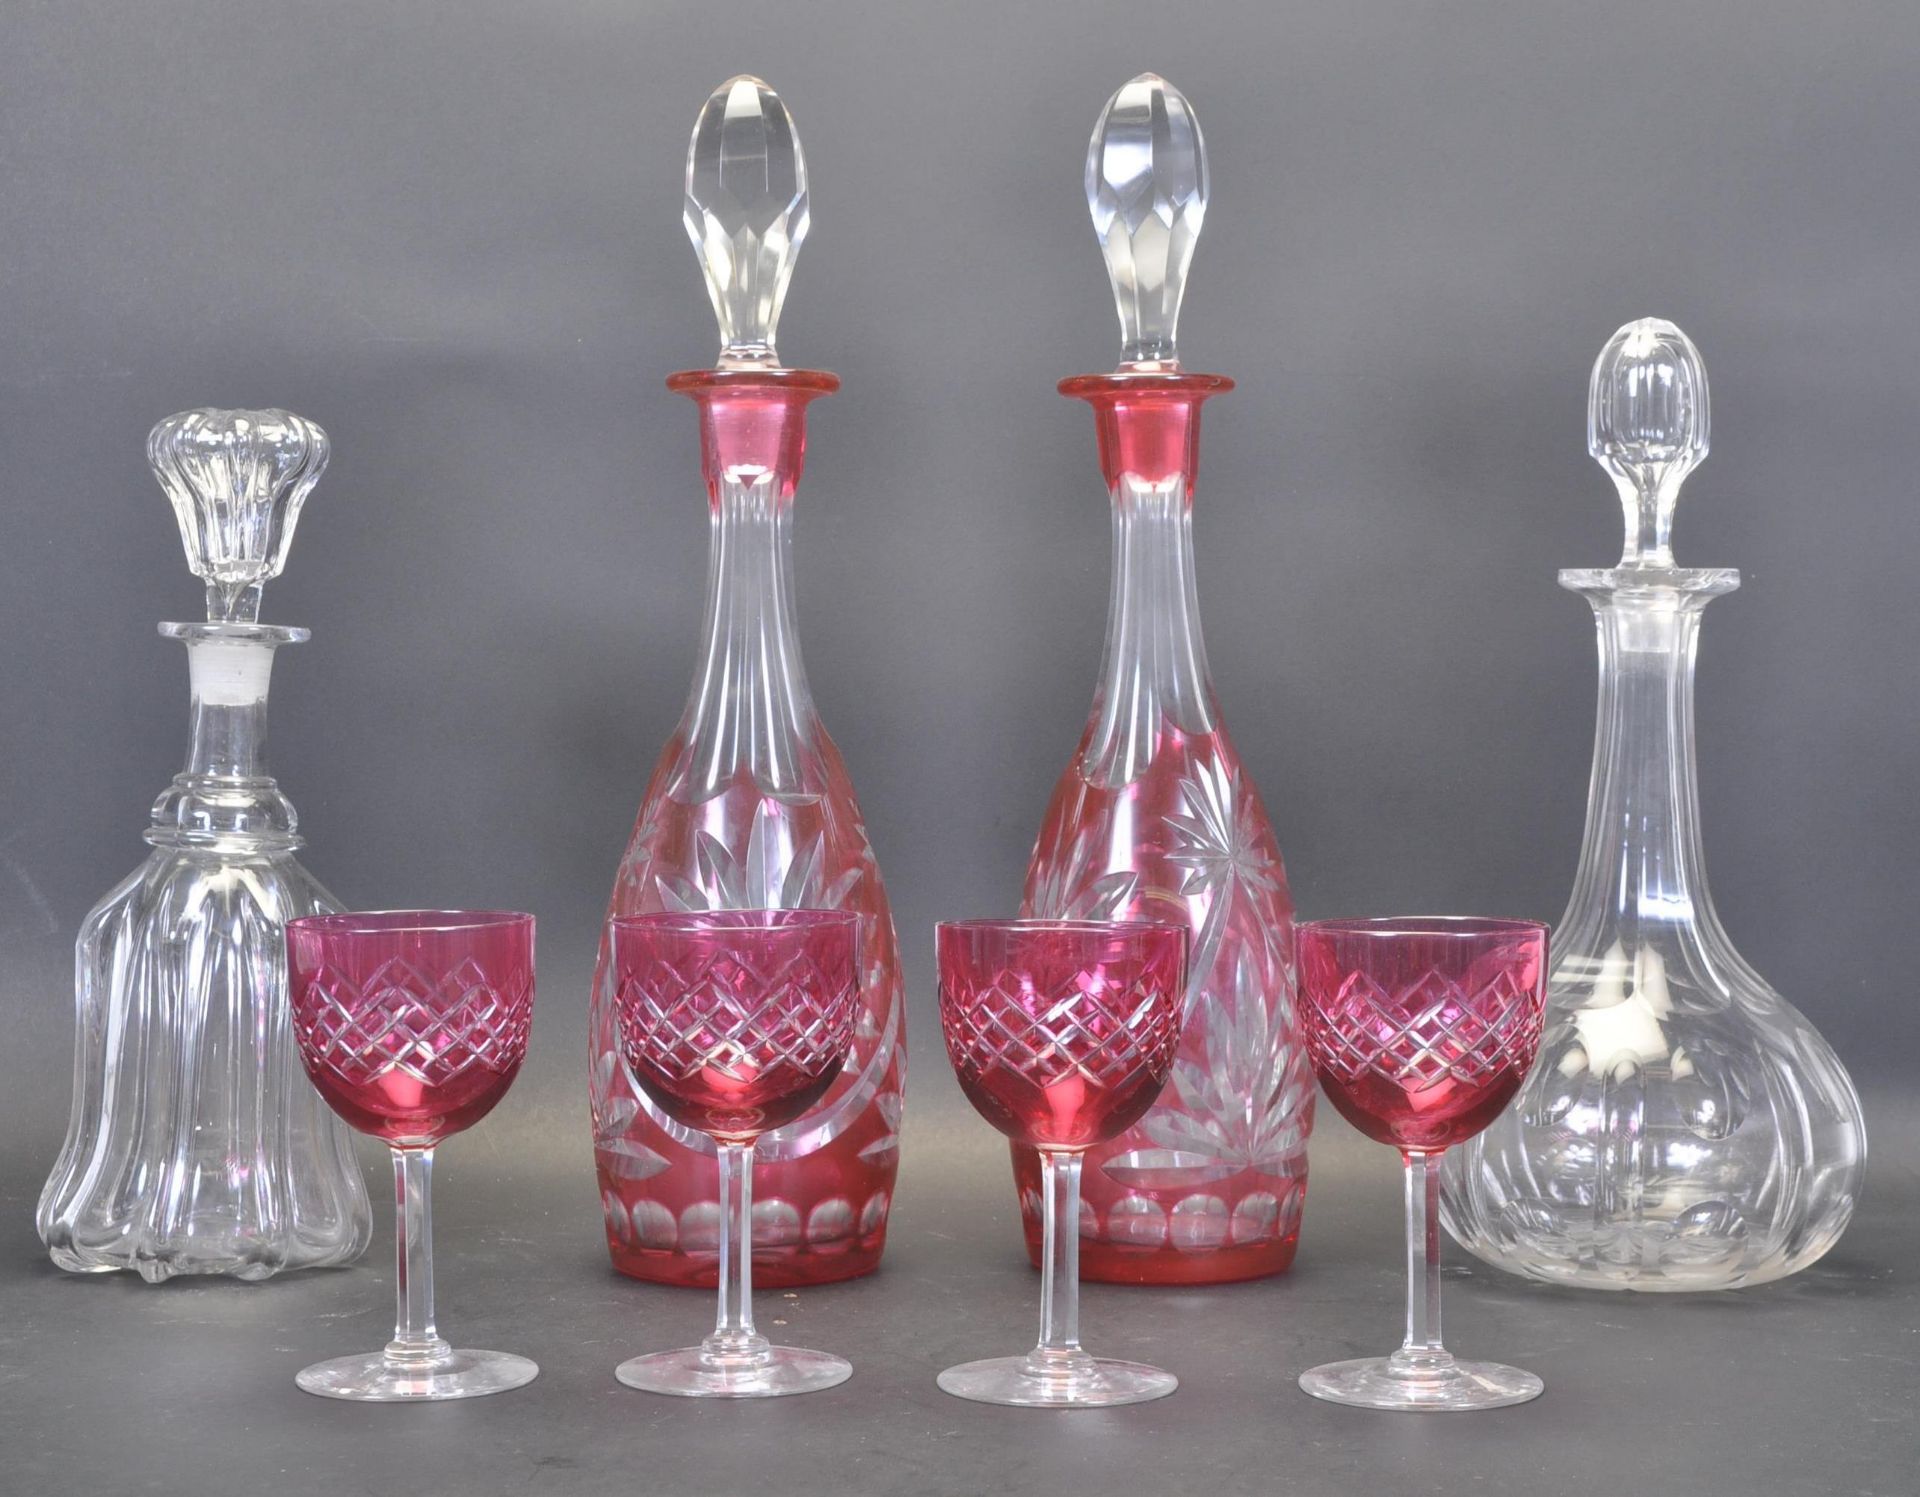 TWO 19TH CENTURY VICTORIAN CRANBERRY GLASS DECANTERS AND SHERRY GLASSES